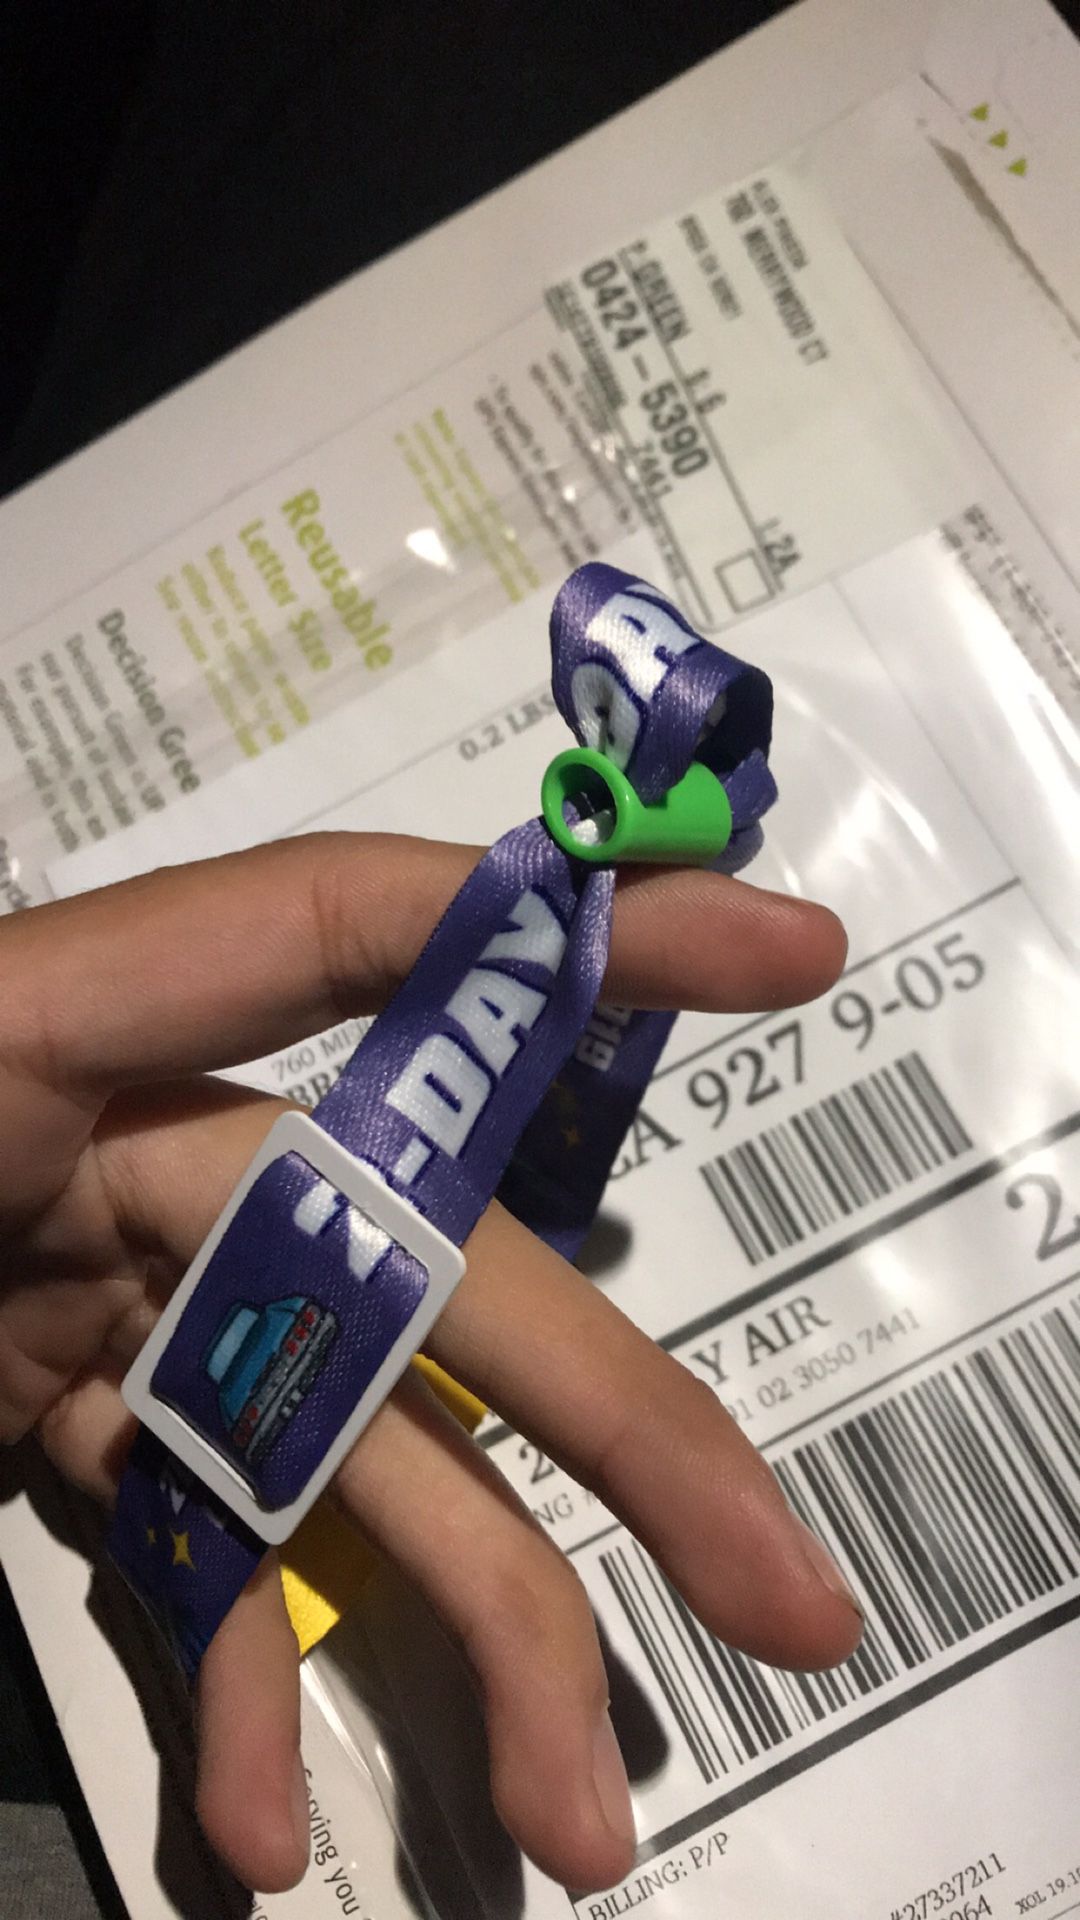 Rolling loud ticket 2 day pass